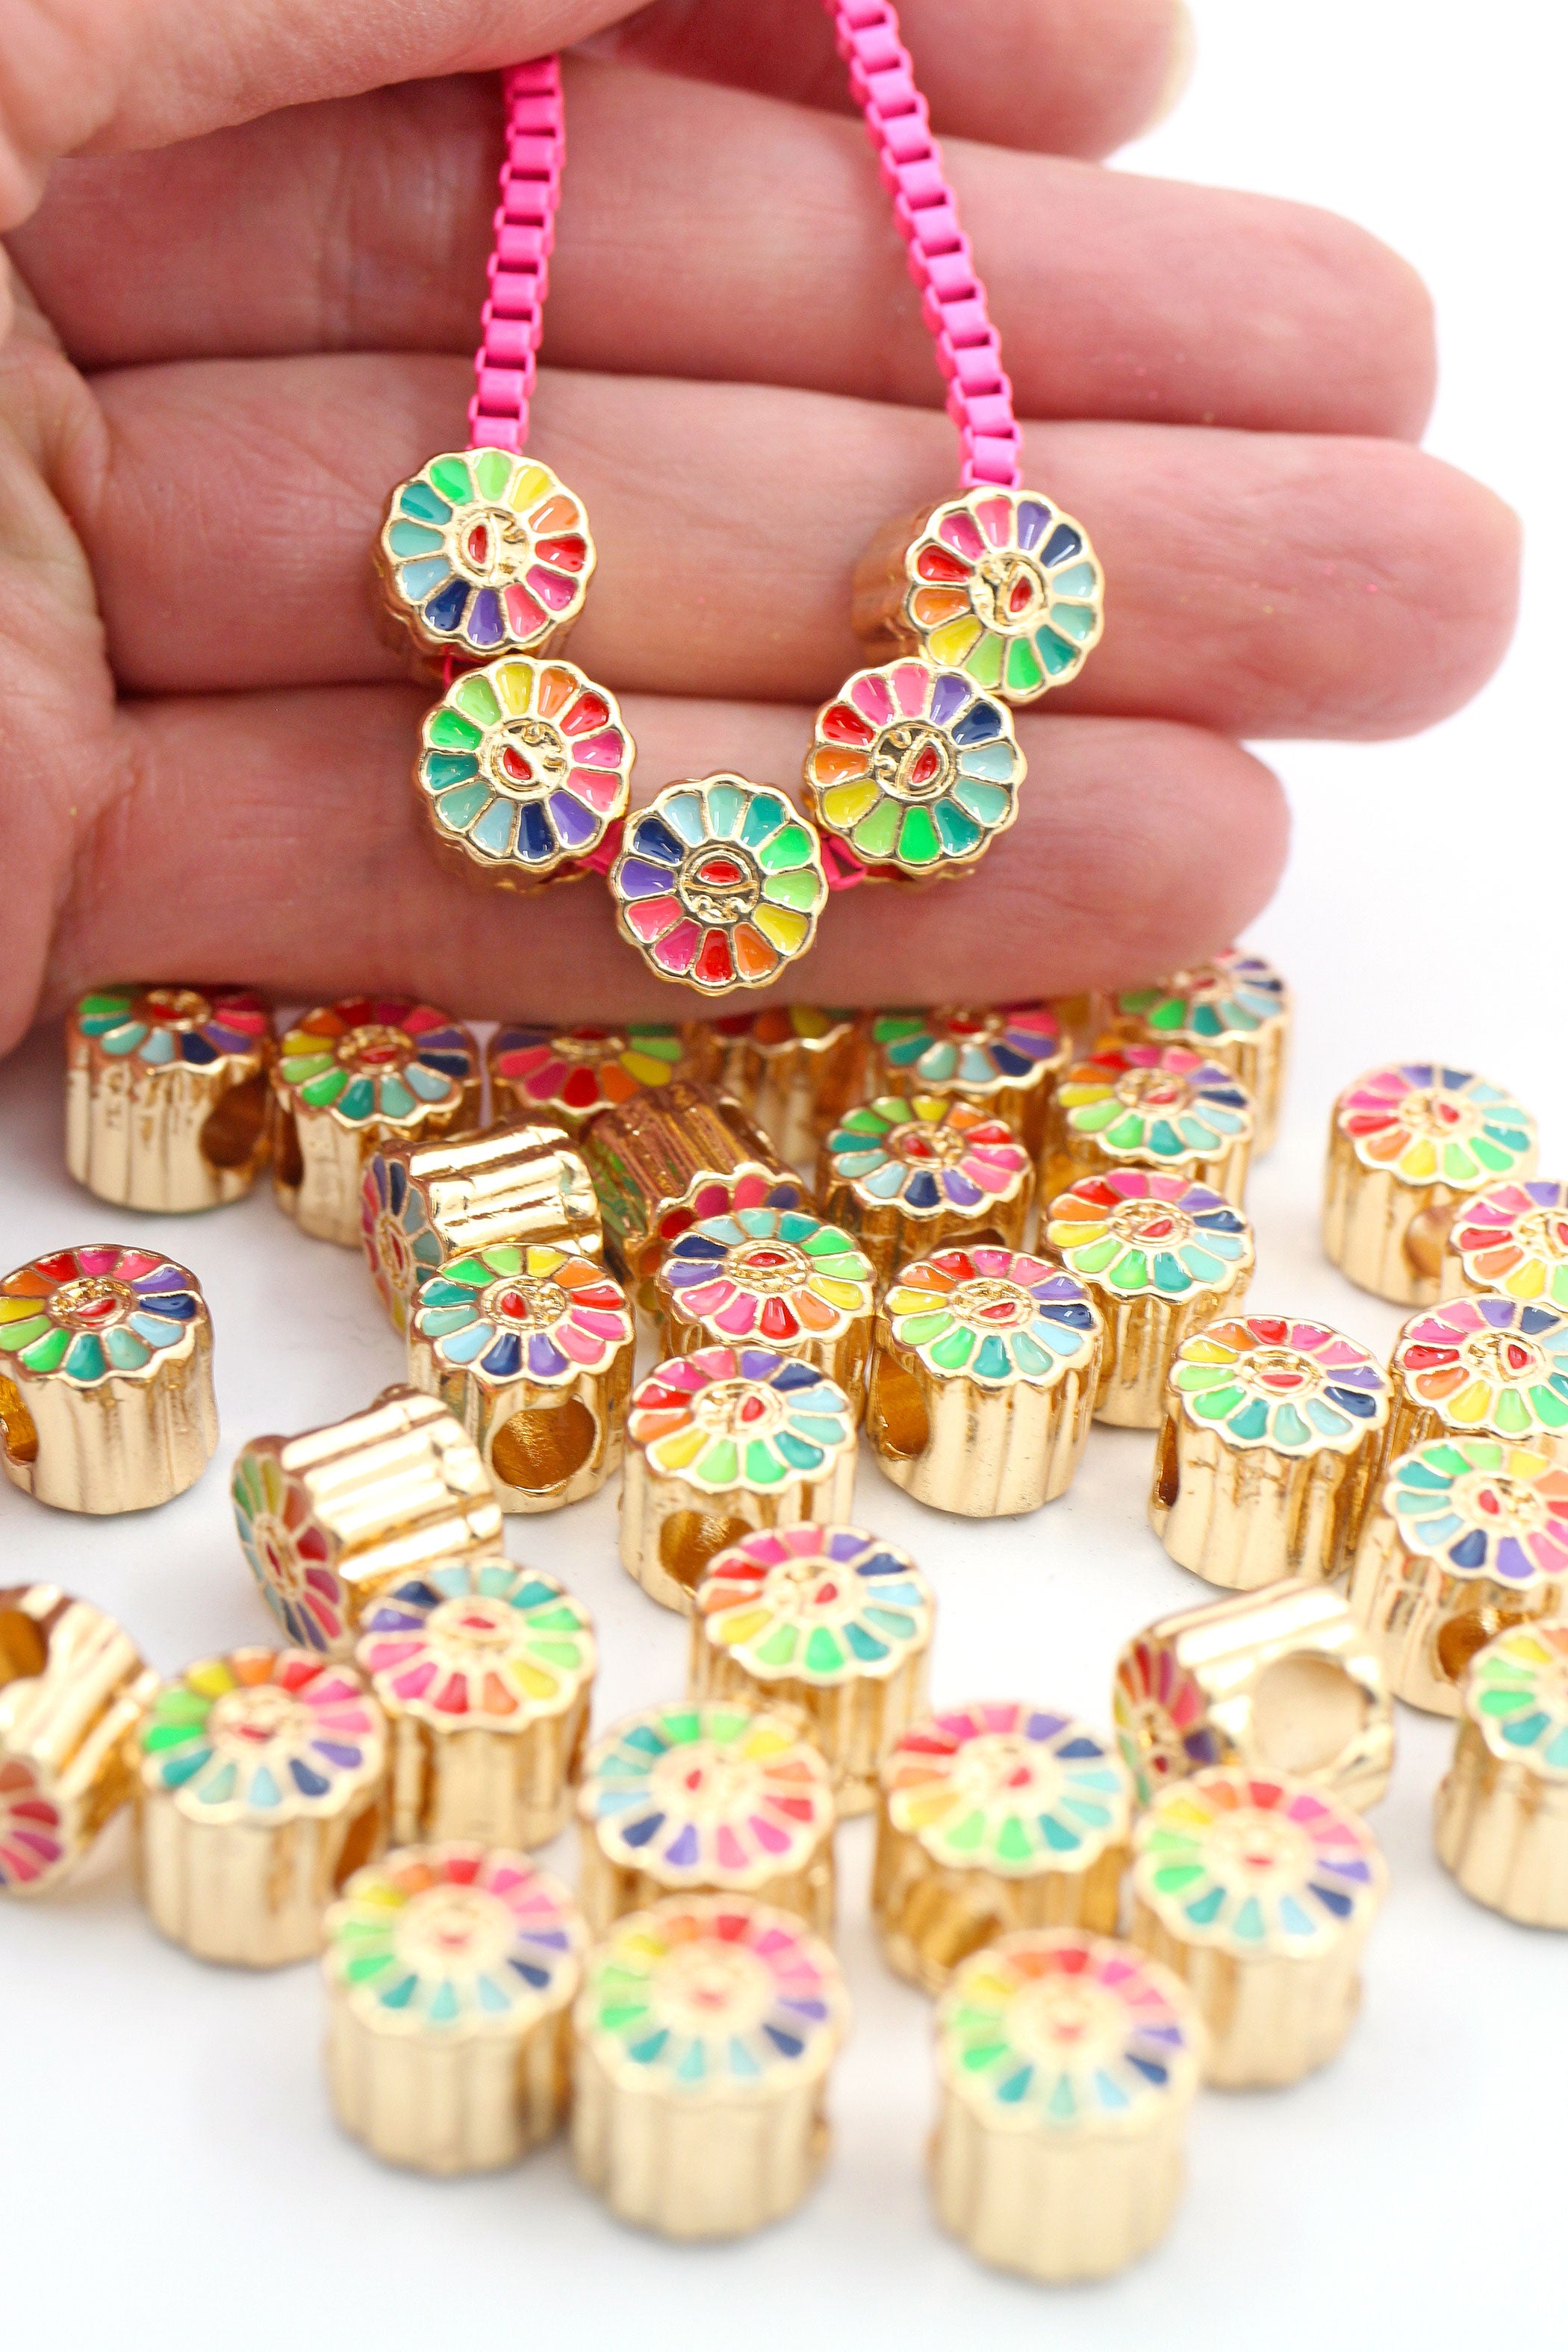 Honbay 30pcs Enamel Alloy Cute Daisy Flower Charms Pendant Bead Charms for Earrings Bracelets Necklaces Jewelry Making and DIY Crafts